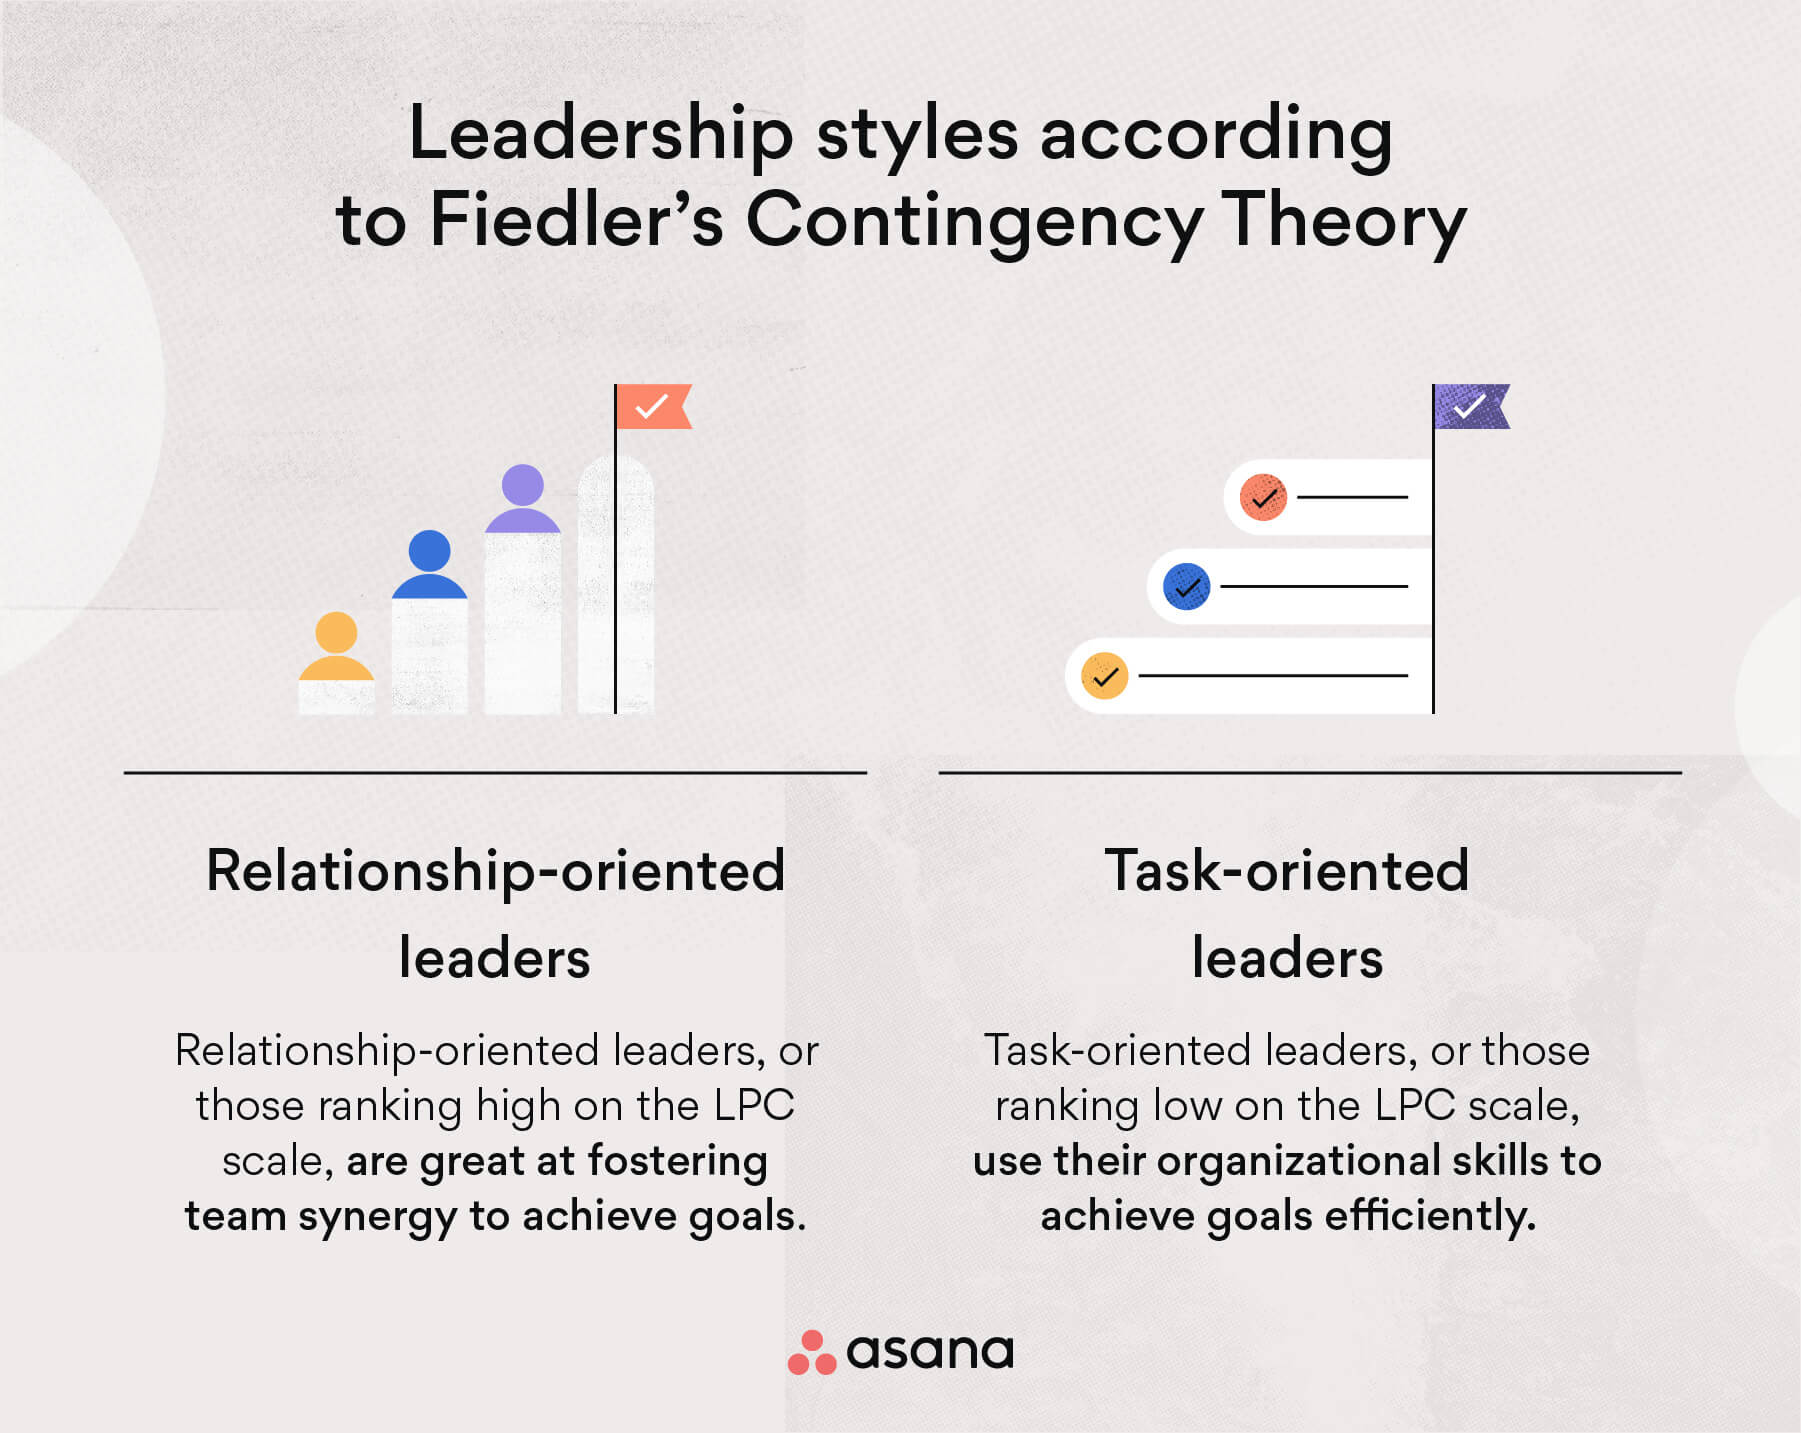 Leadership syles according to Fiedler's Contingency Theory